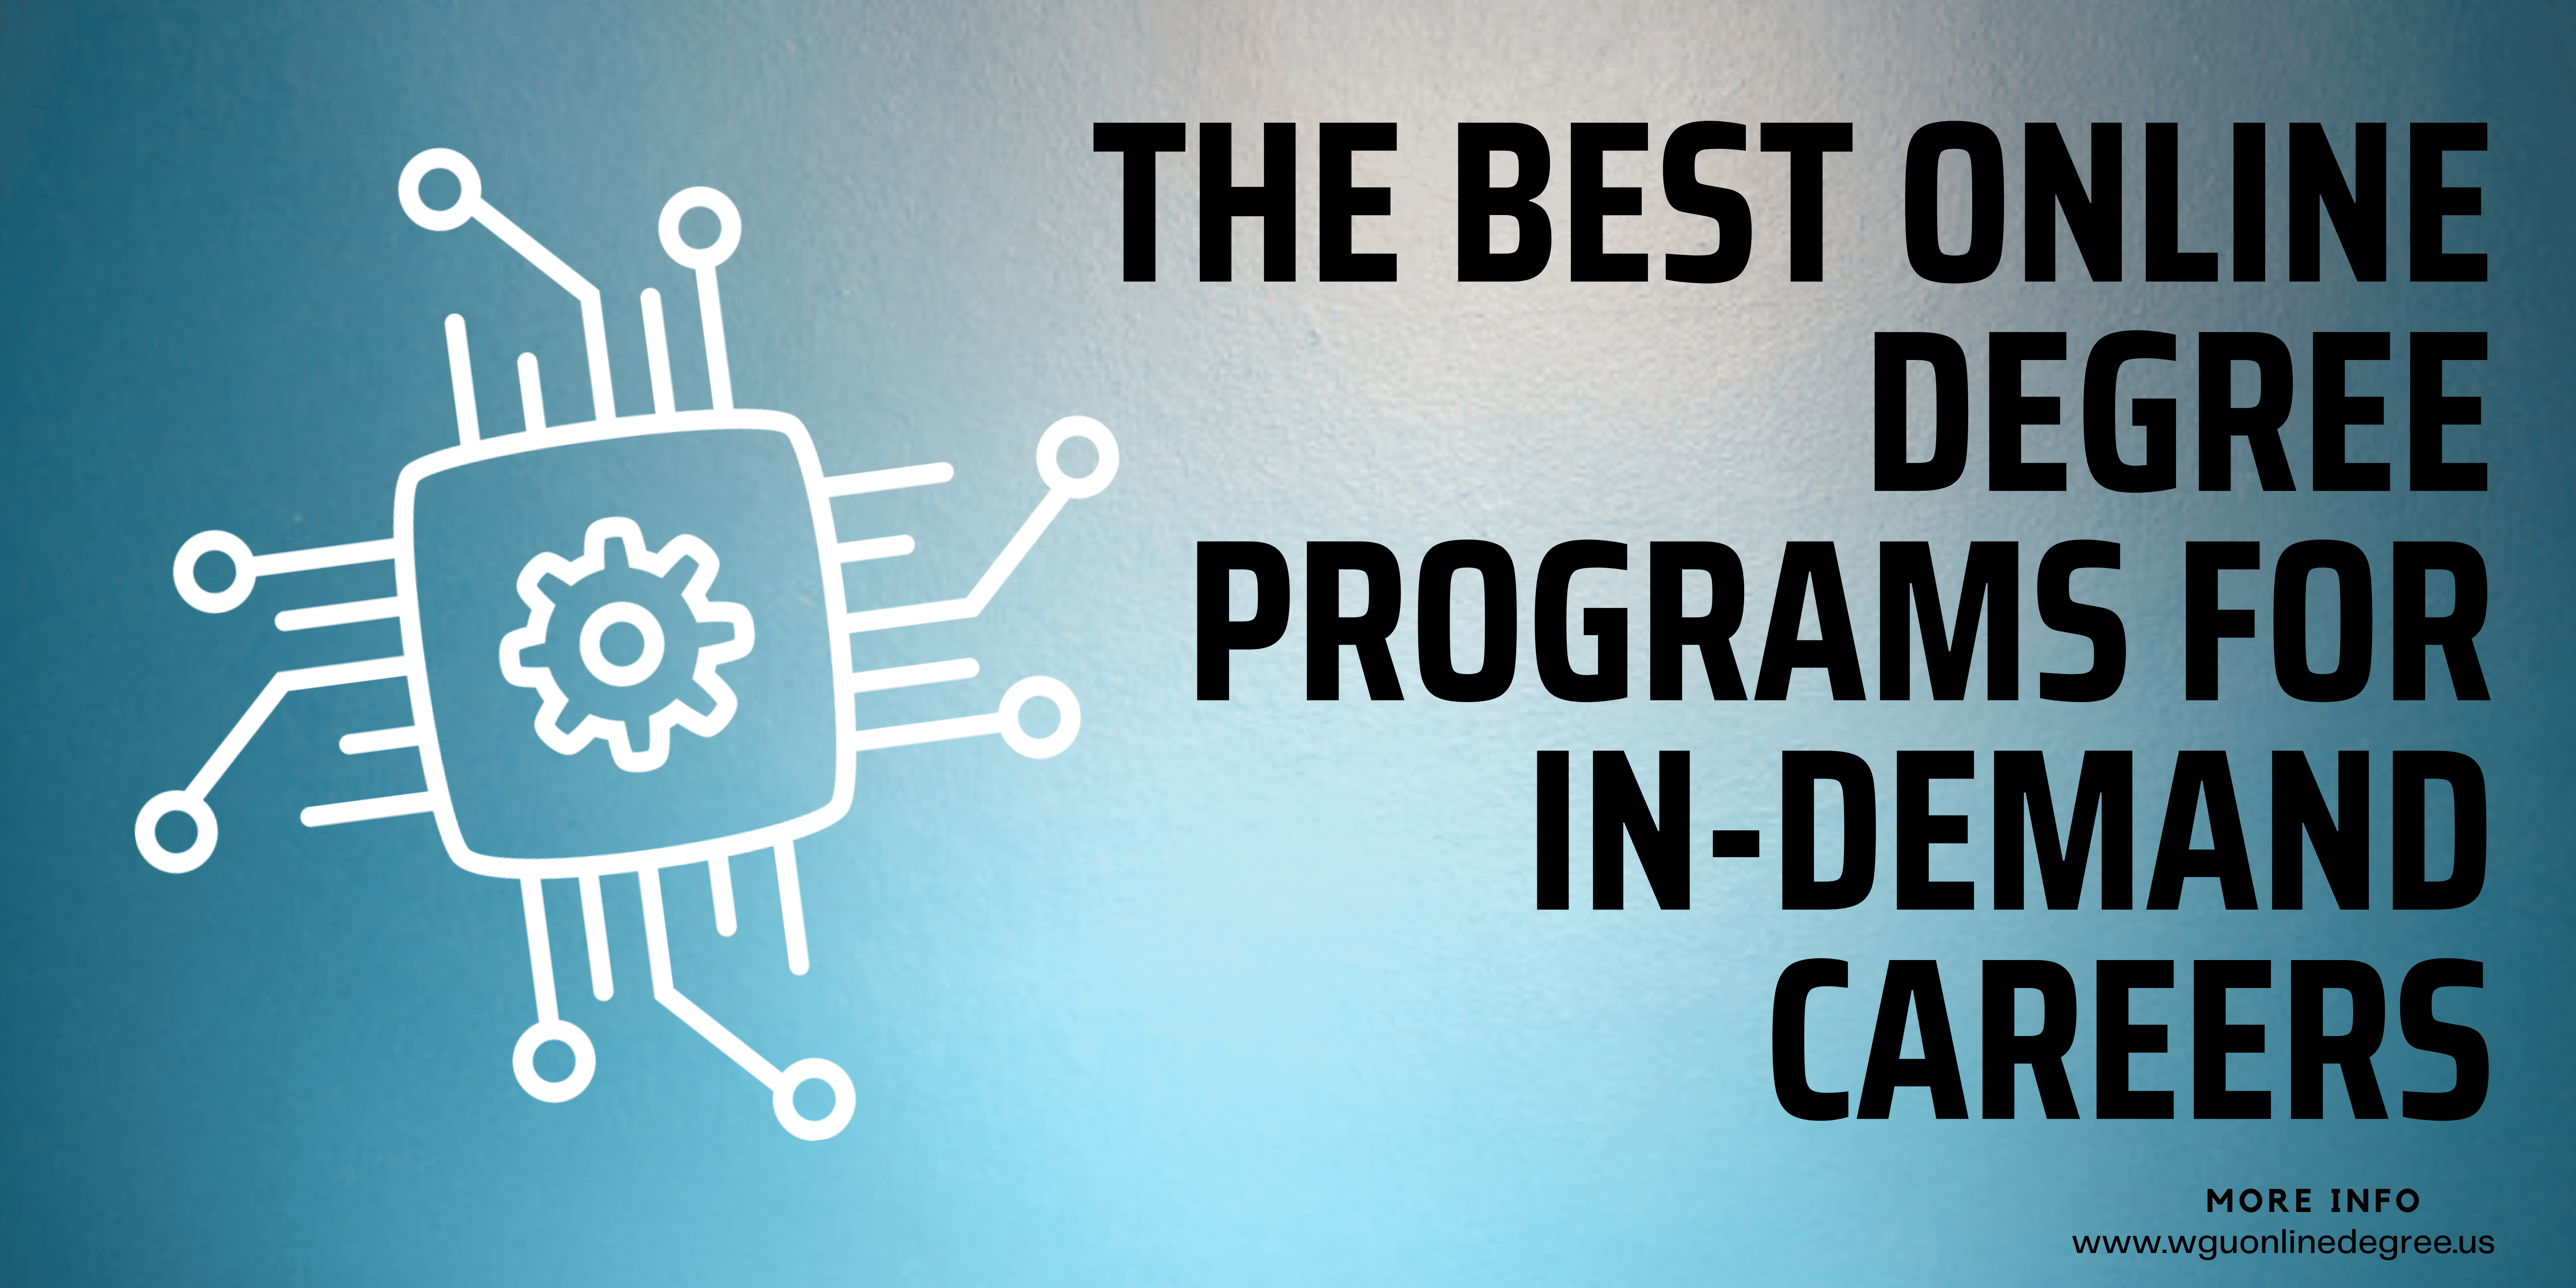 The Best Online Degree Programs for In-Demand Careers